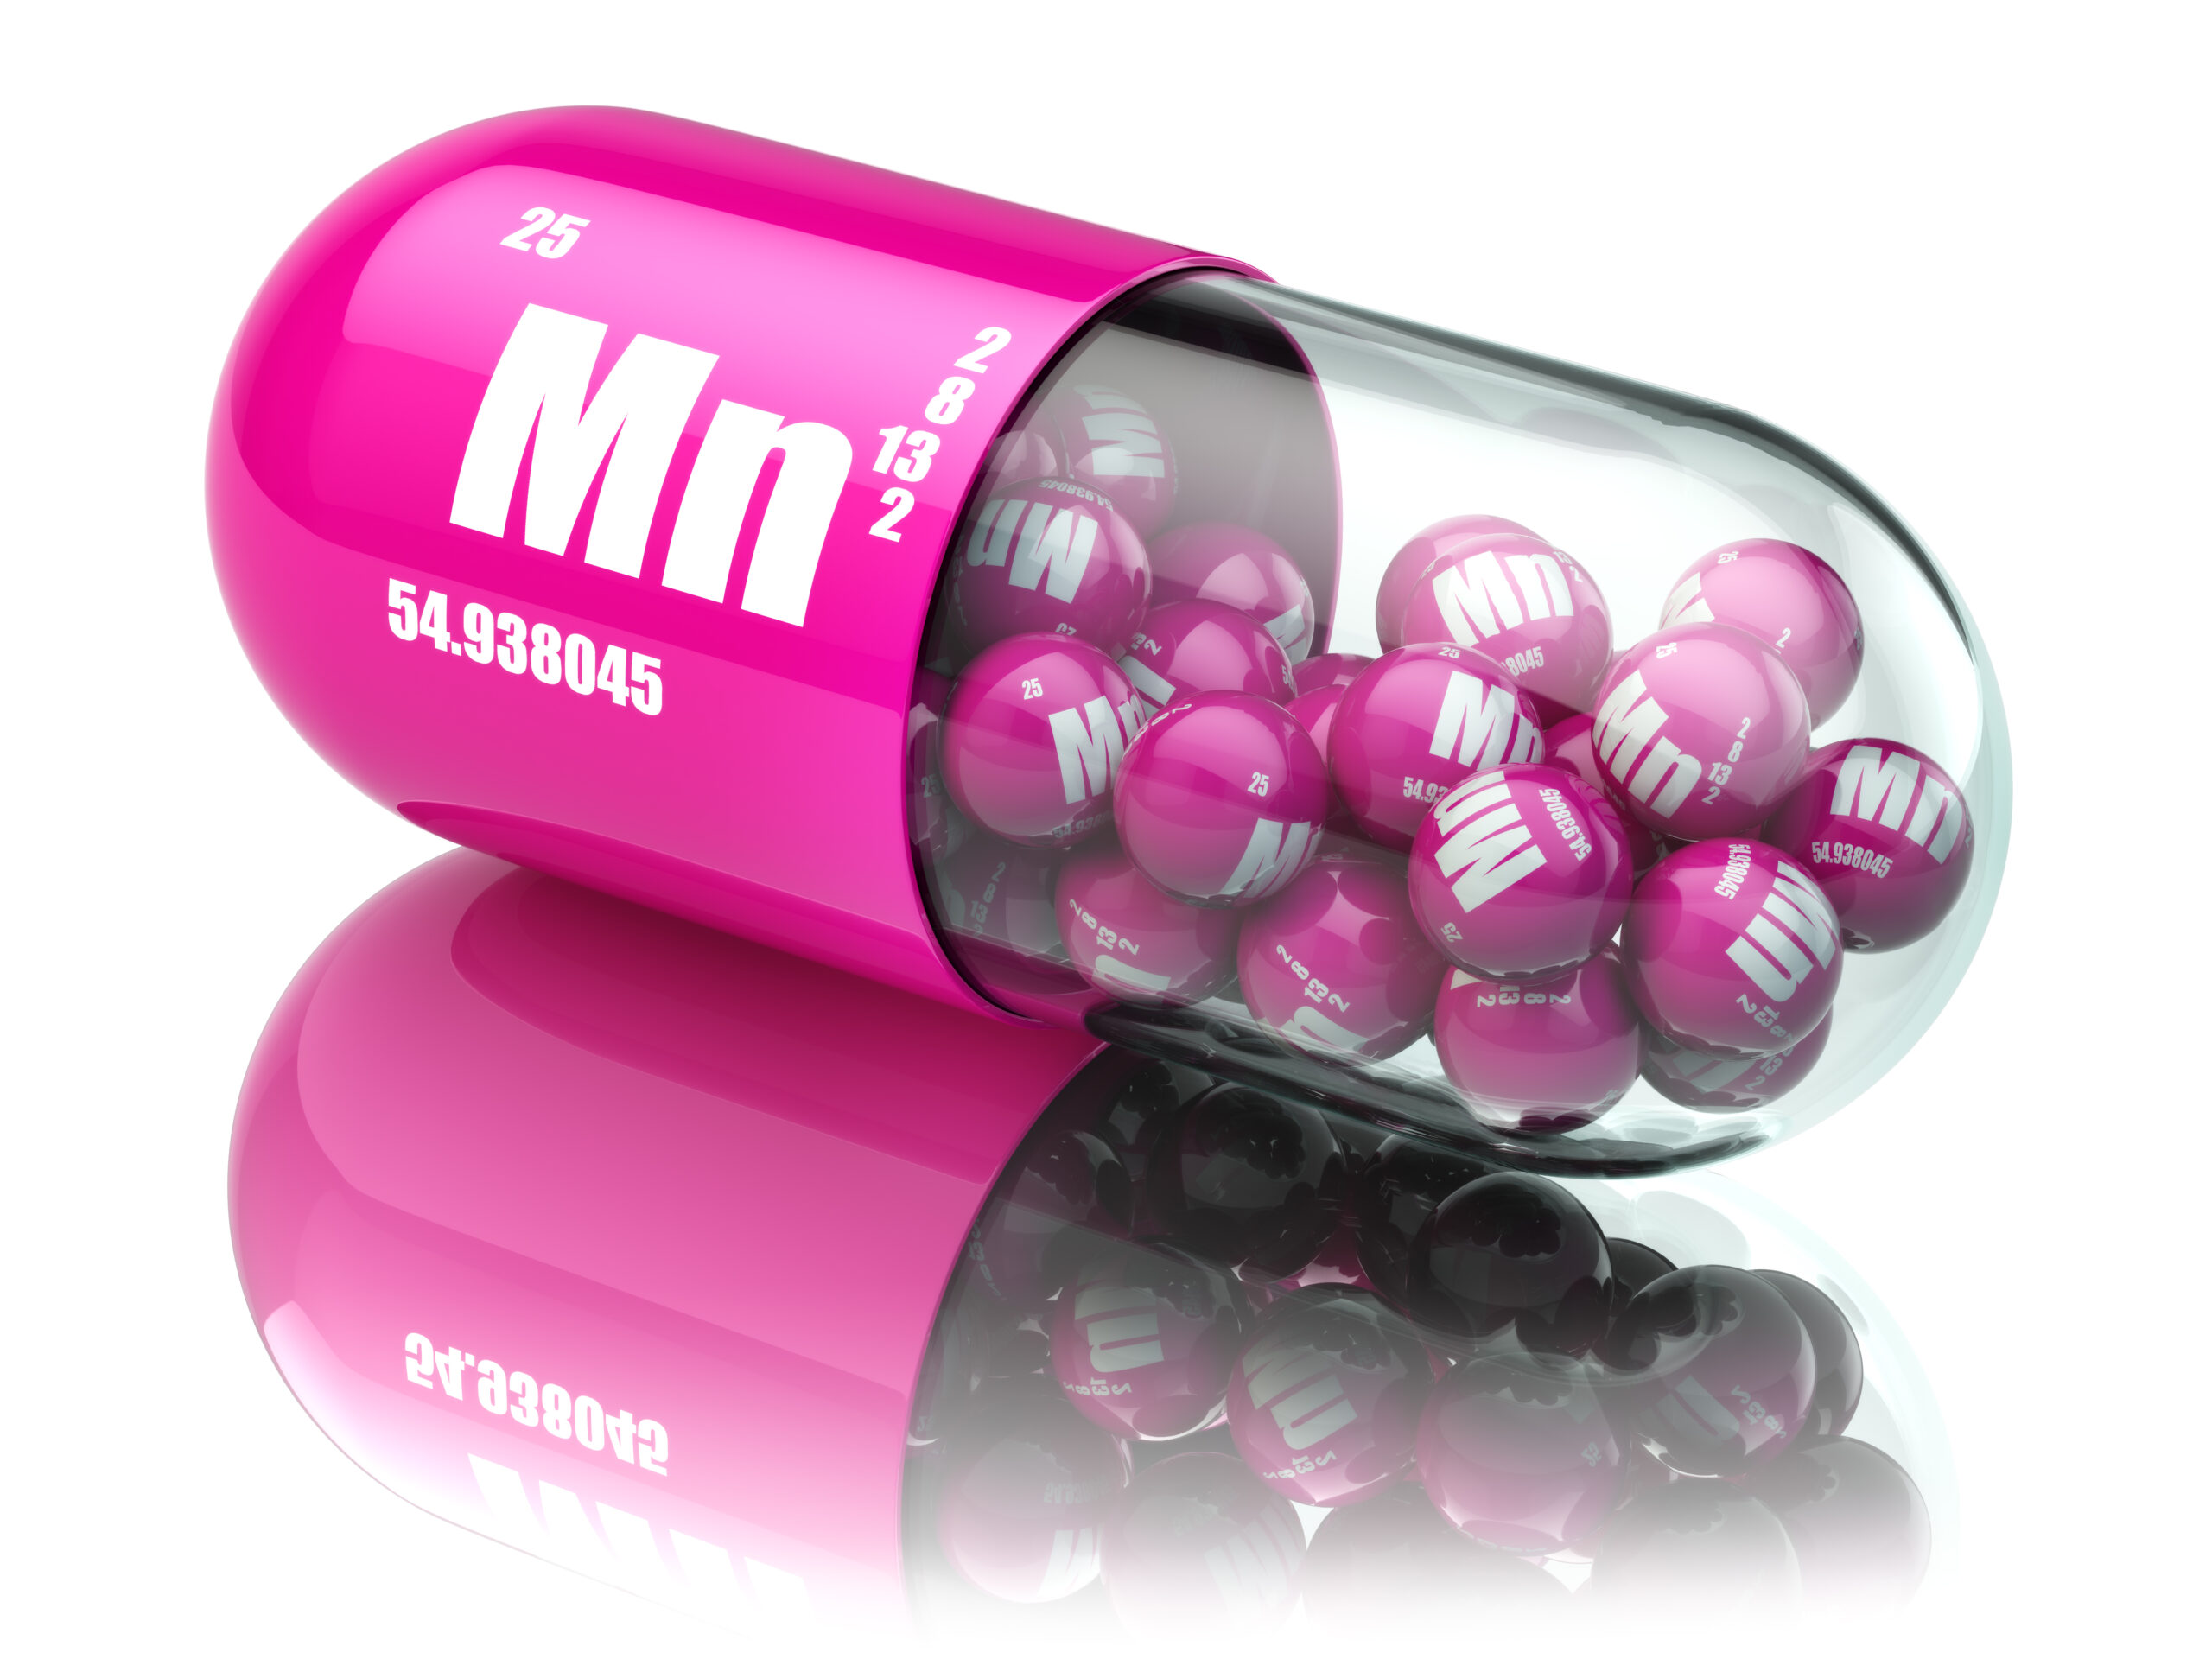 Pills with manganese Mn element Dietary supplements. Vitamin cap